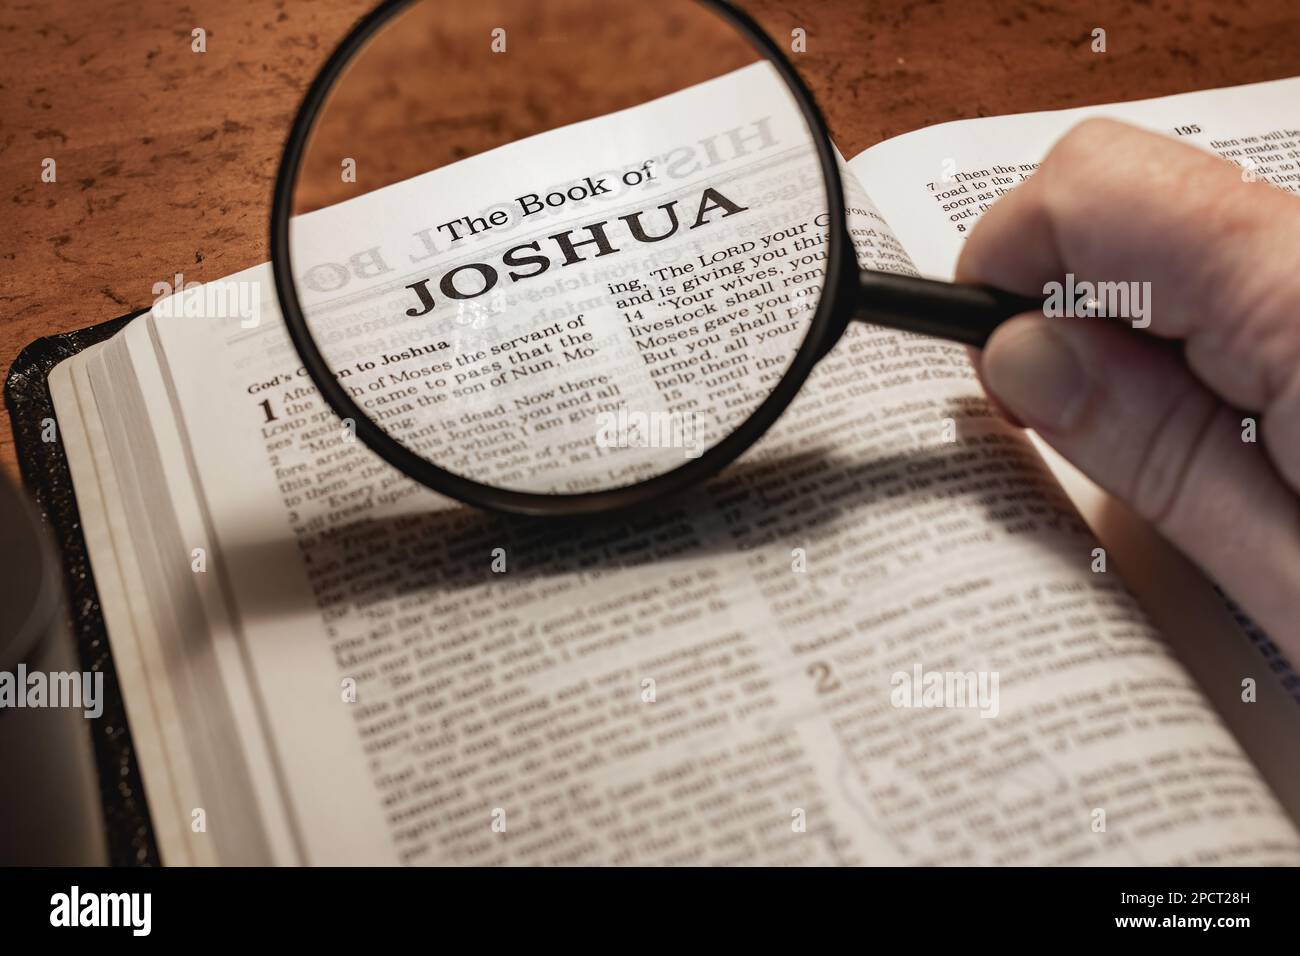 Magnifying Glass For Reading A Book Open Bible The Study Of Literature  Stock Photo - Download Image Now - iStock